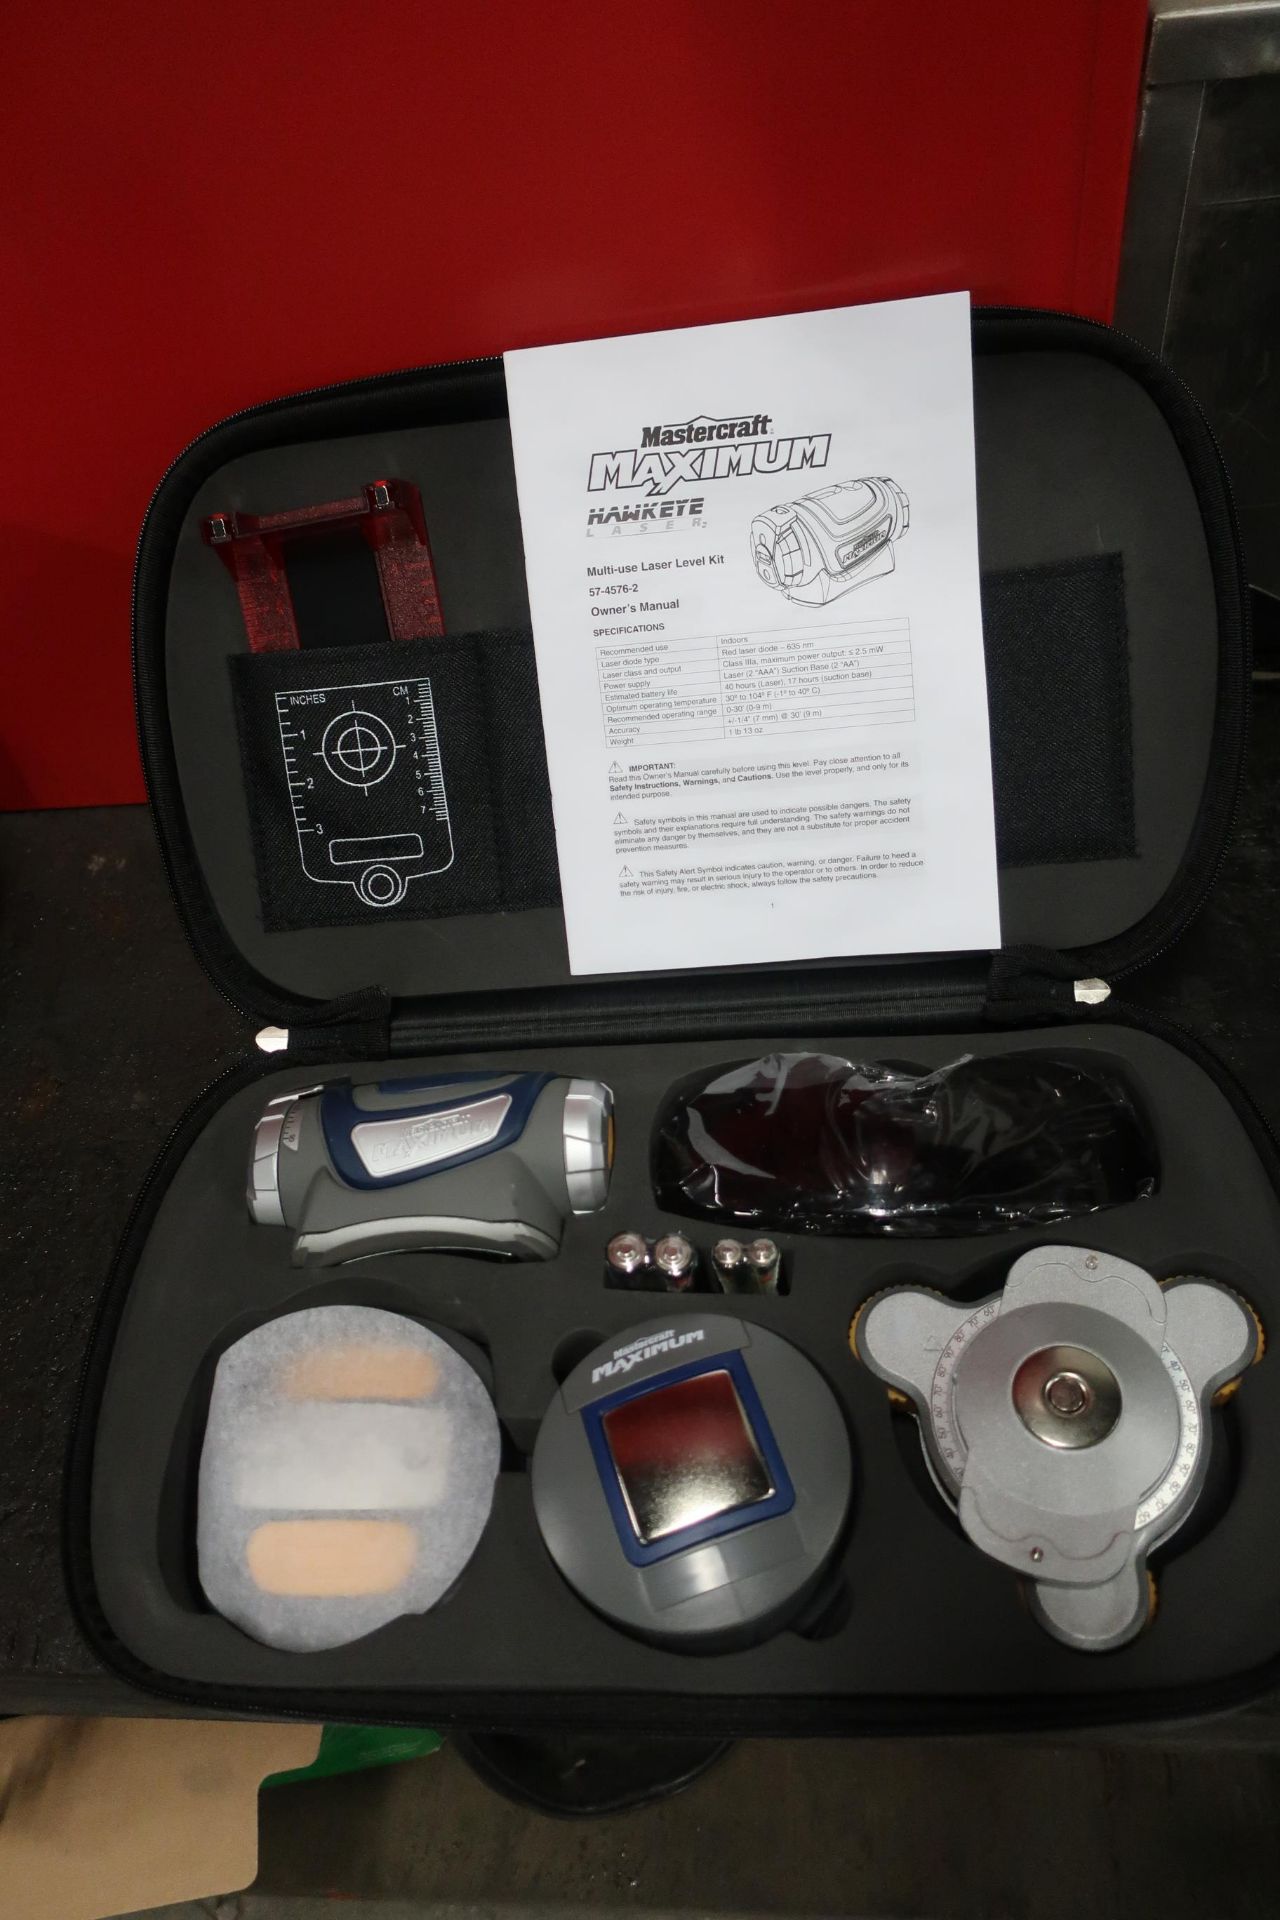 Mastercraft Maximum Hawkeye Laser Level Kit MINT in case COMPLETE WITH ACCESSORIES